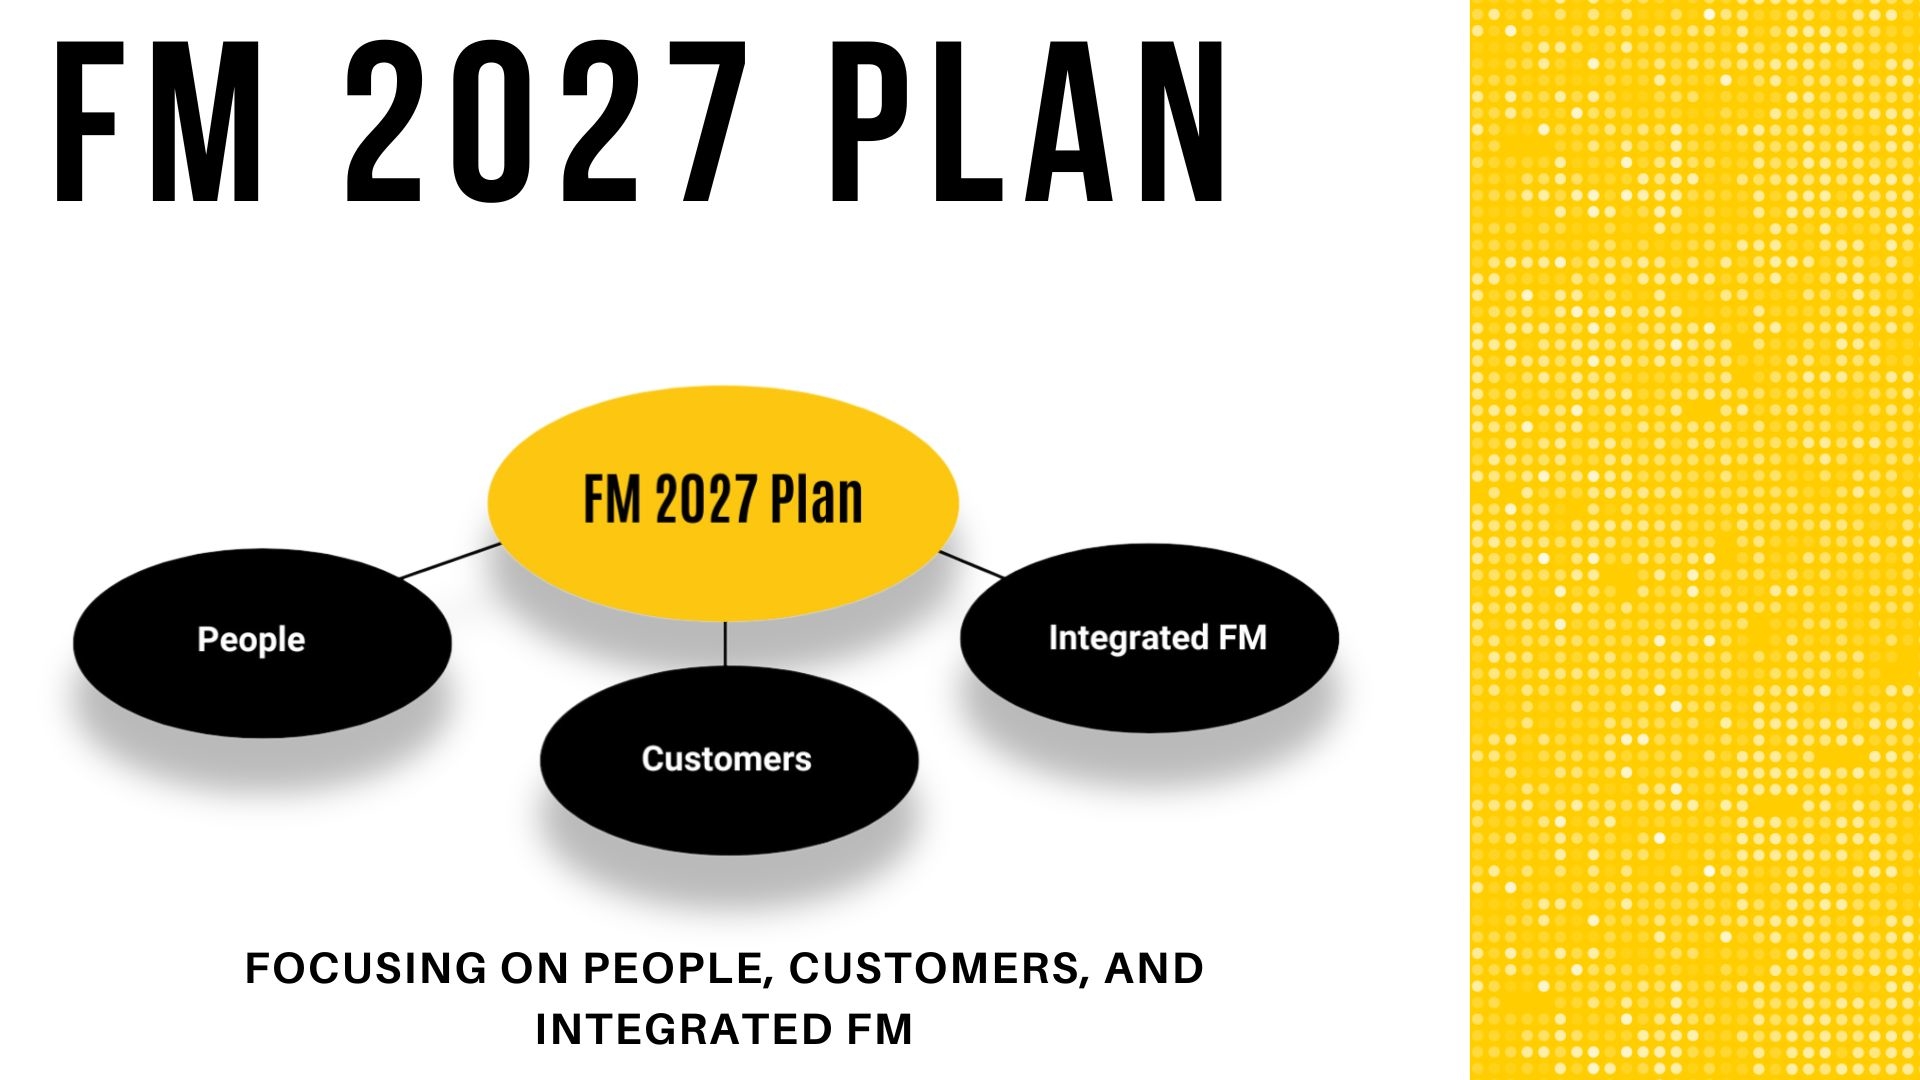 Shows the diagram of the FM 2027 plan. Starting with a large yellow circle that says "FM 2027 Plan". That yellow circle has three lines connecting it into three smaller black circles. The first circle says "people. The next says "Customers". The last circle says "Integrated FM. 